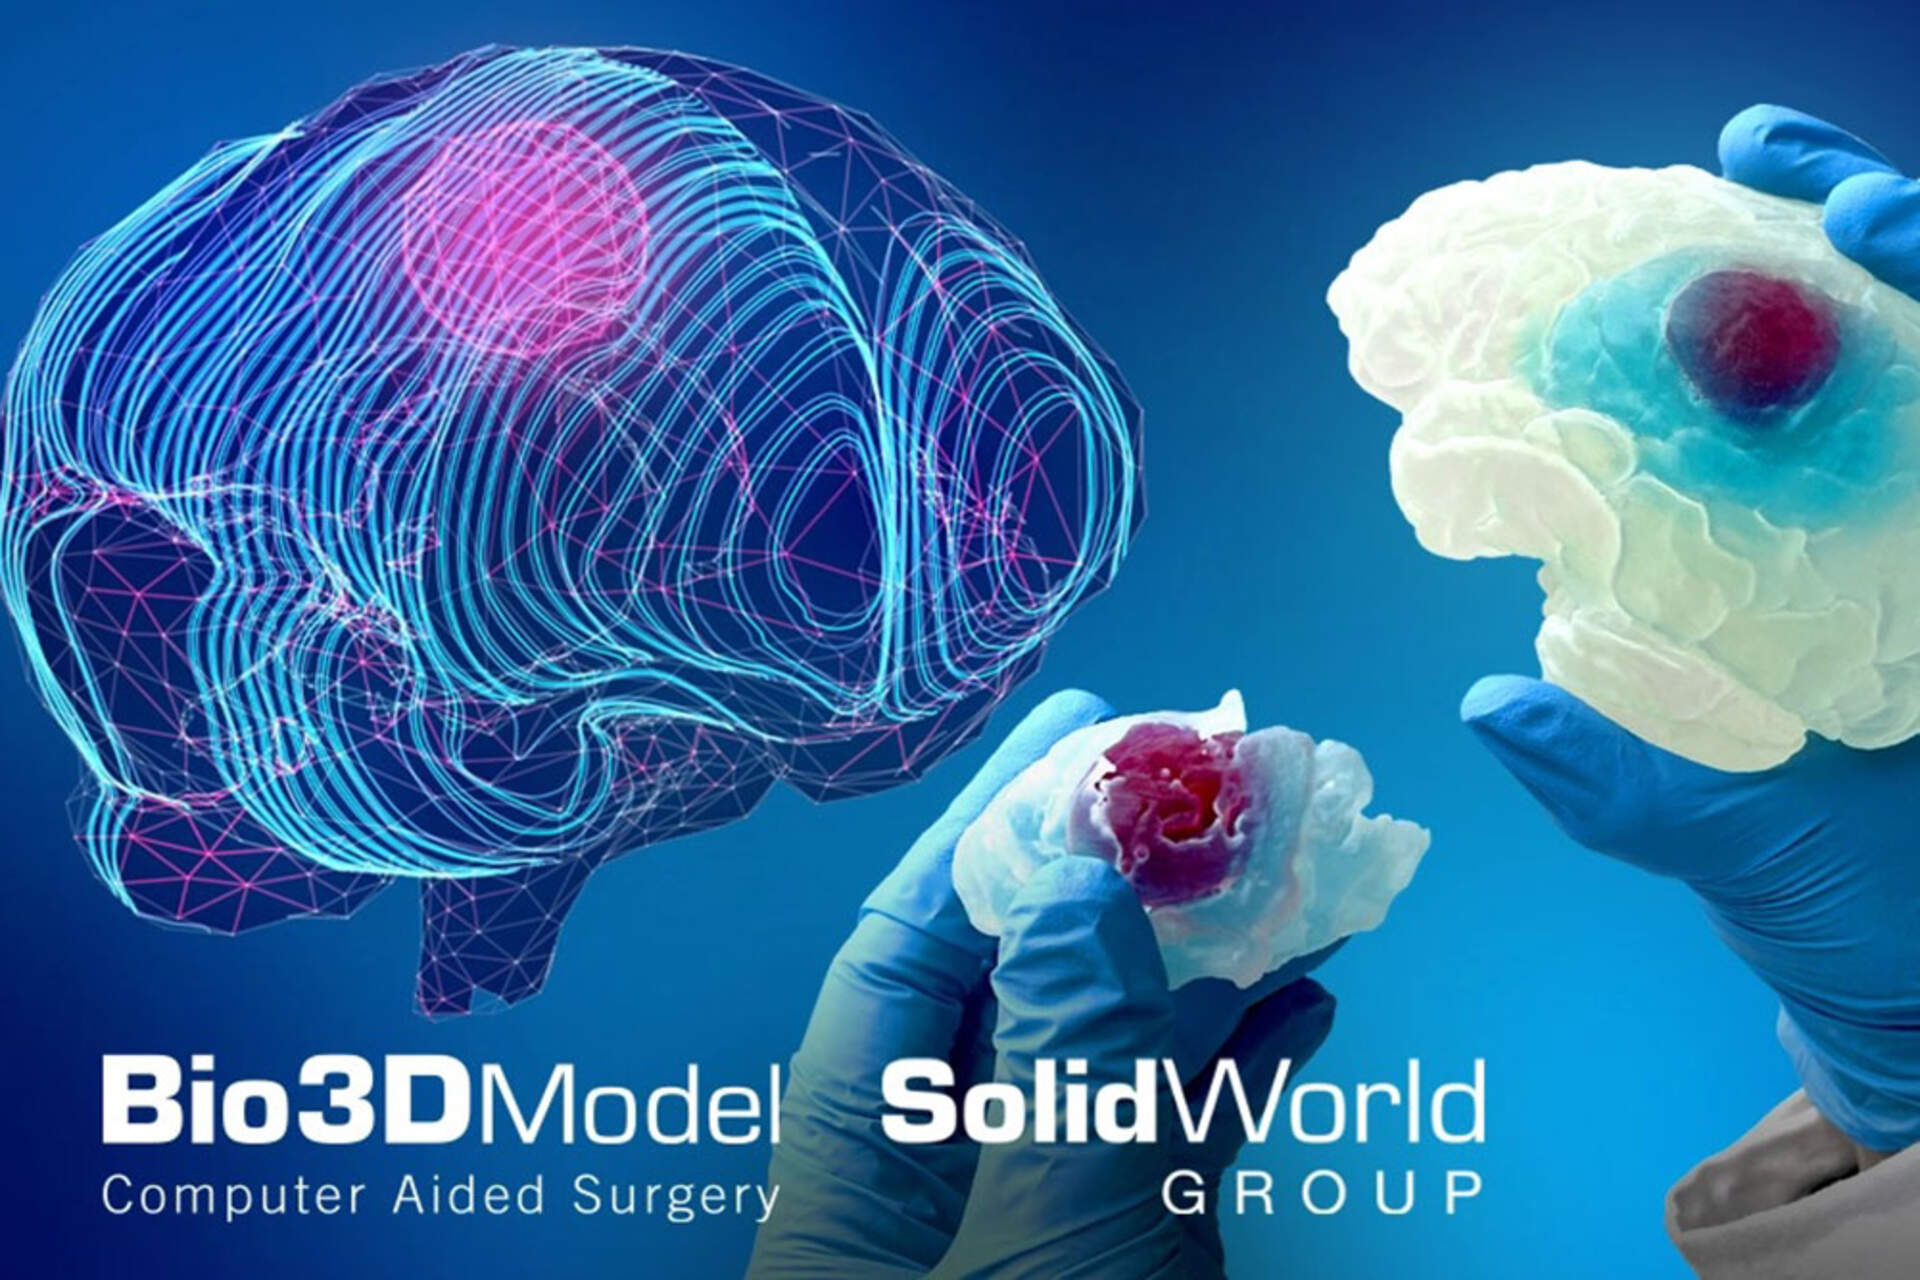 Human Brain: A key visual of the tumor-affected brain 3D printed by SolidWorld Group